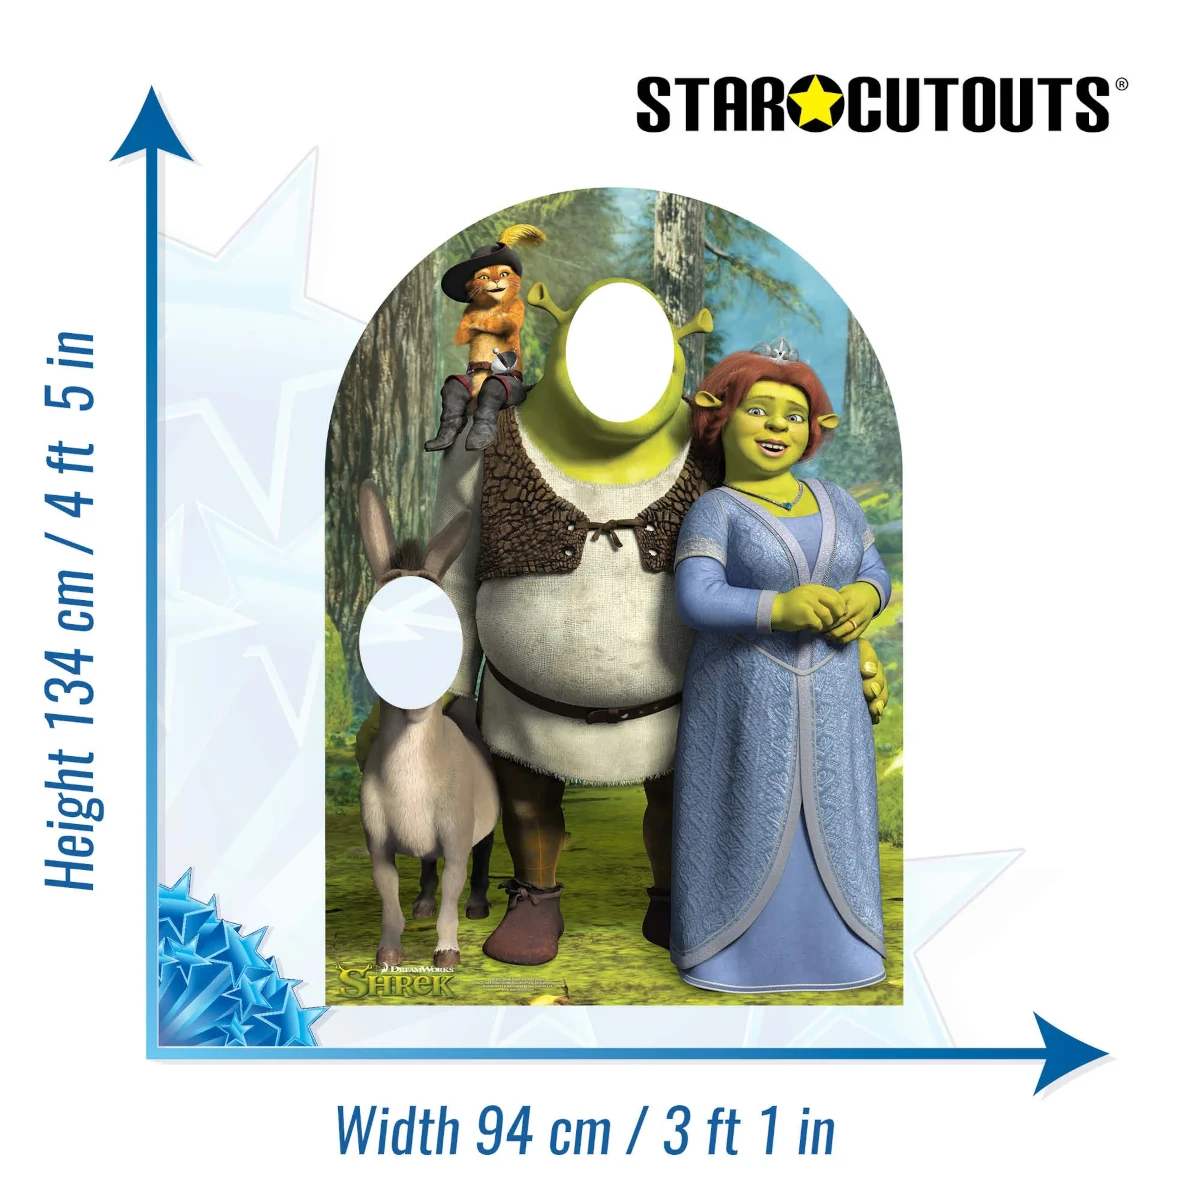 SC821 Shrek (DreamWorks) Official Child Size Stand-In Cardboard Cutout Standee Size